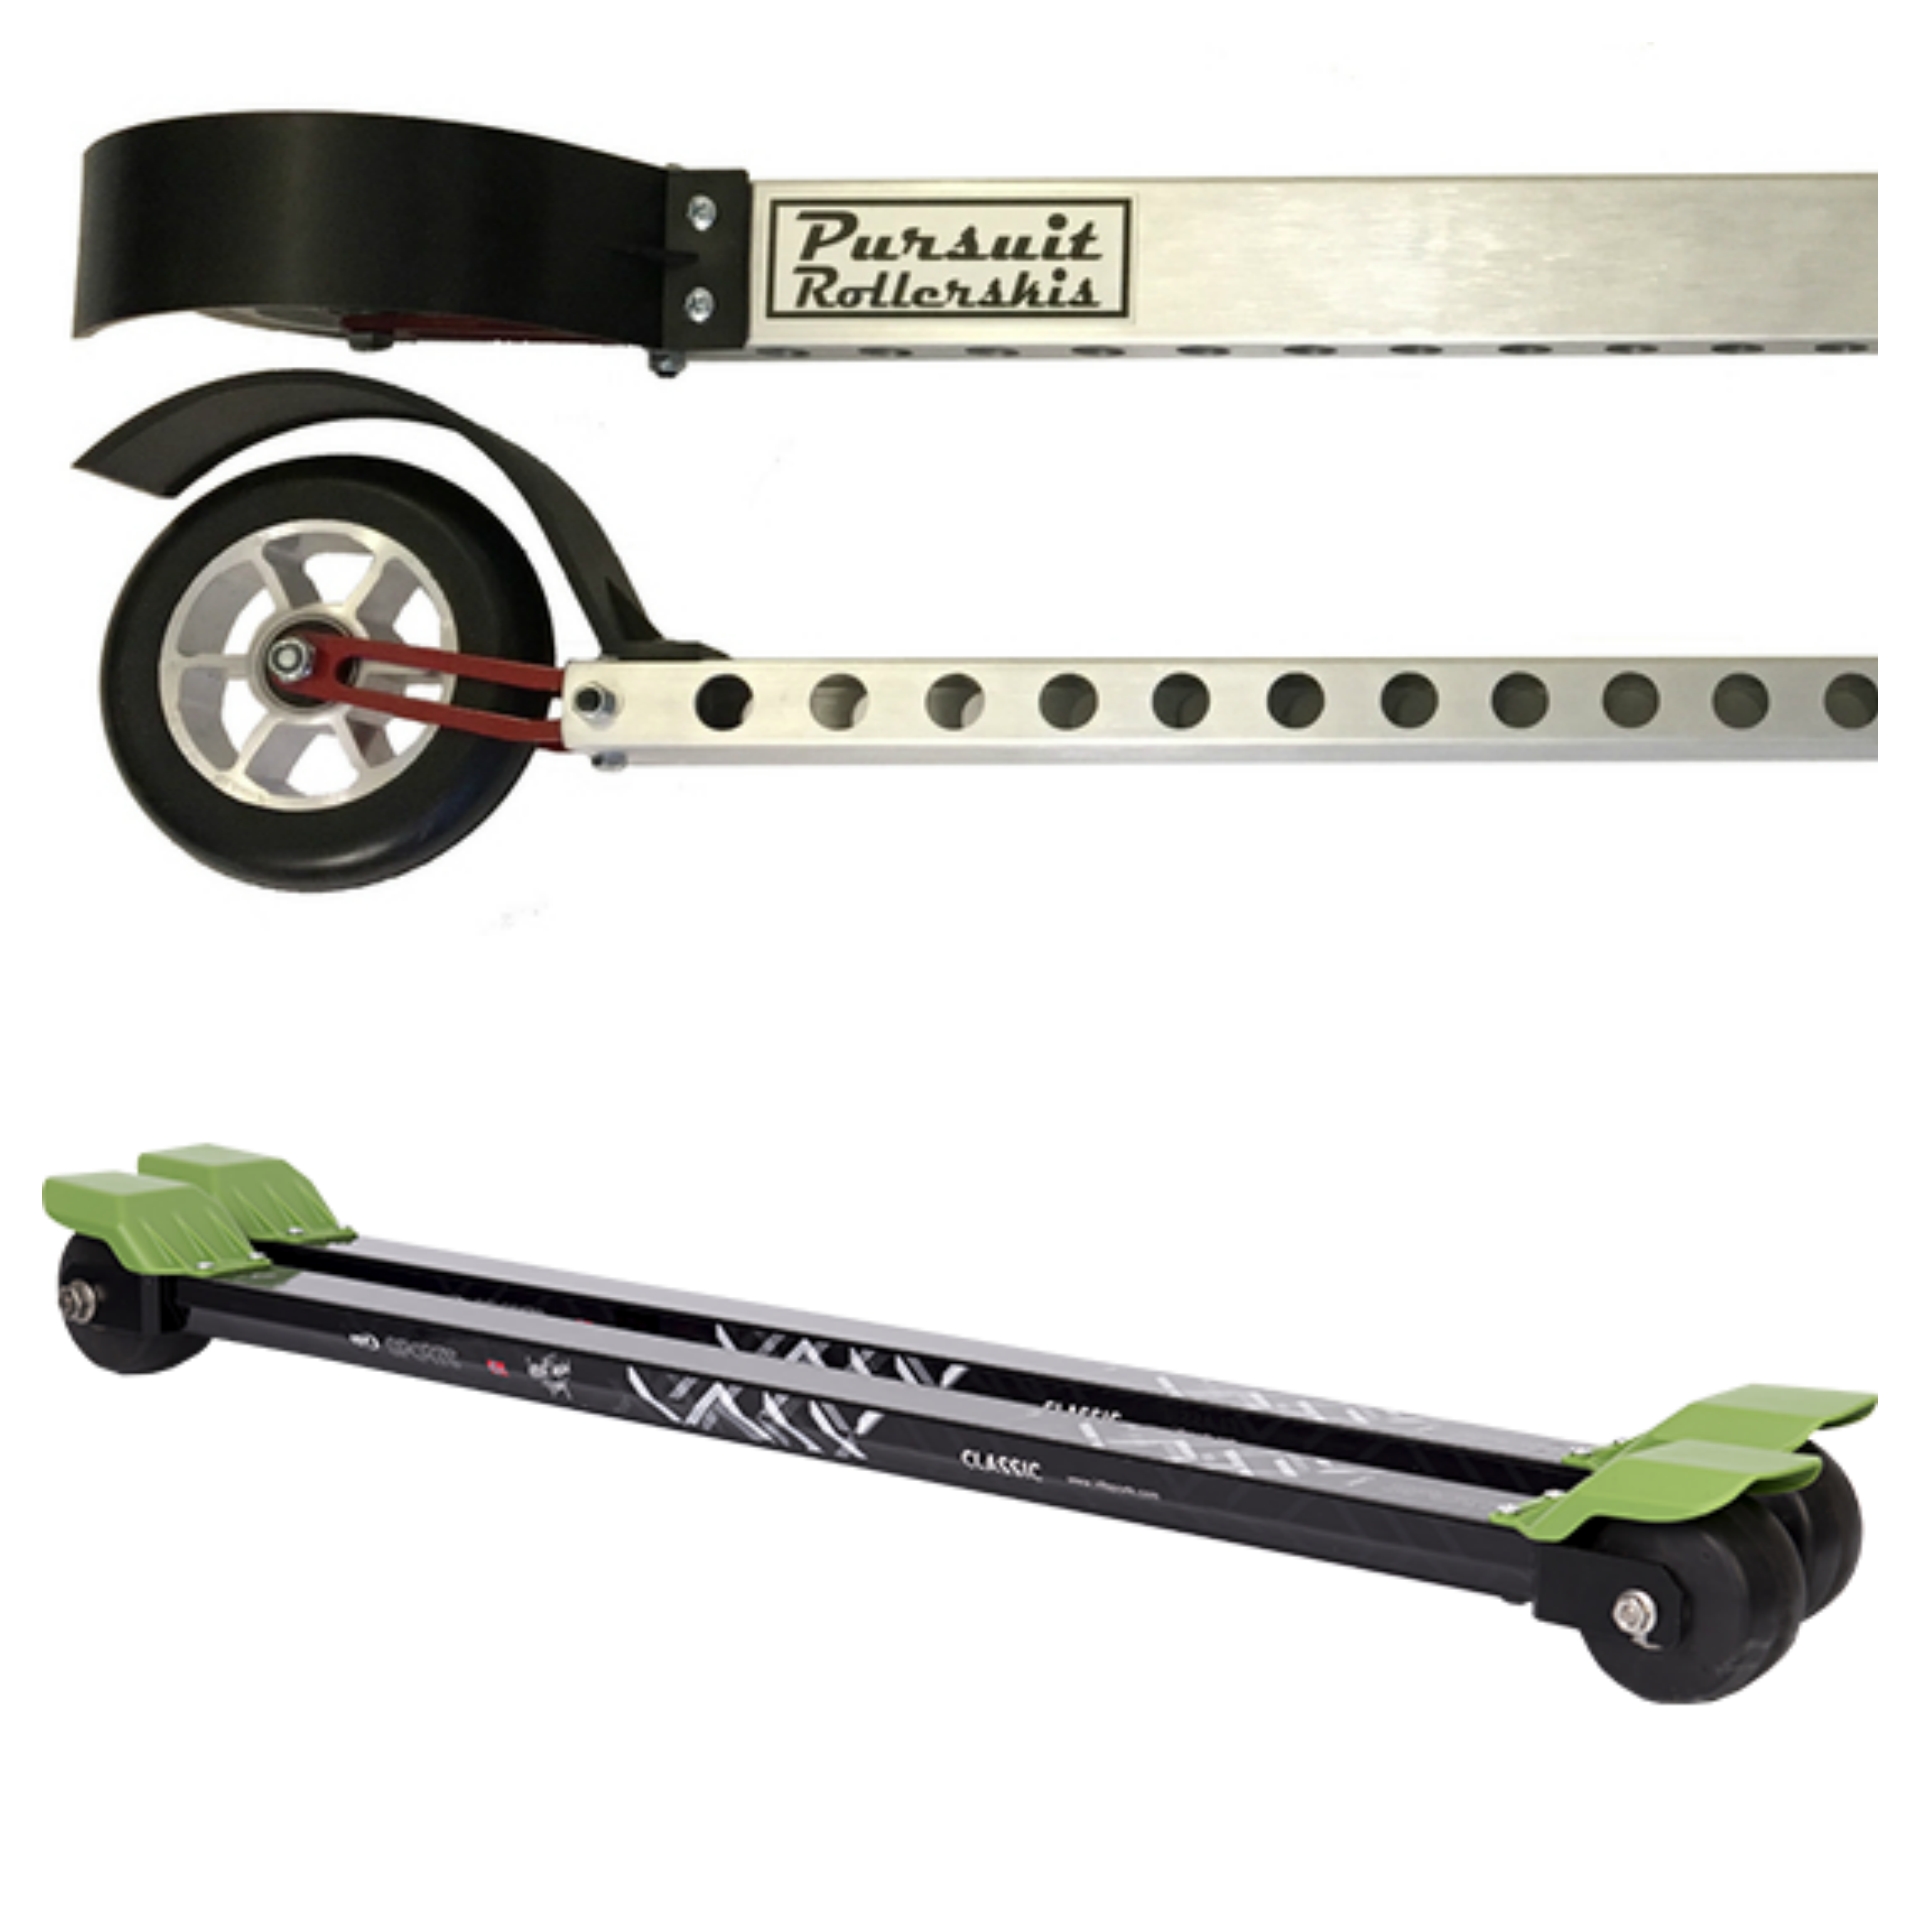 Pursuit Fork Flex Roller Skis (top) and IDT Classic Elite Rollerskis, FBD pick for $250+